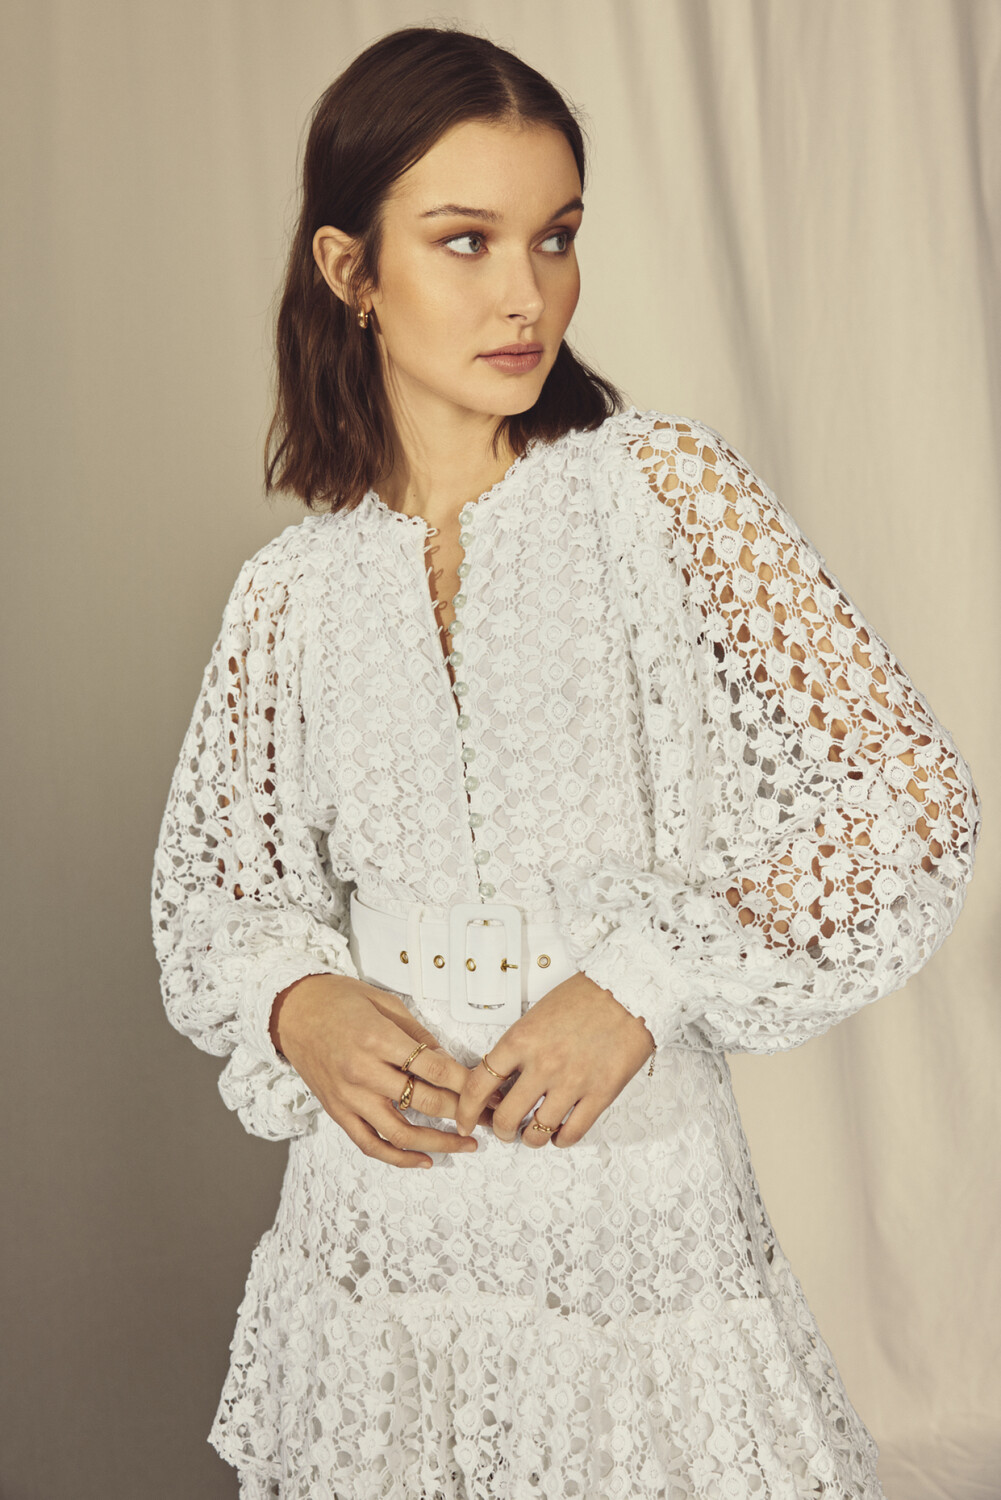 ByTiMo Lace Crochet Shirt in White